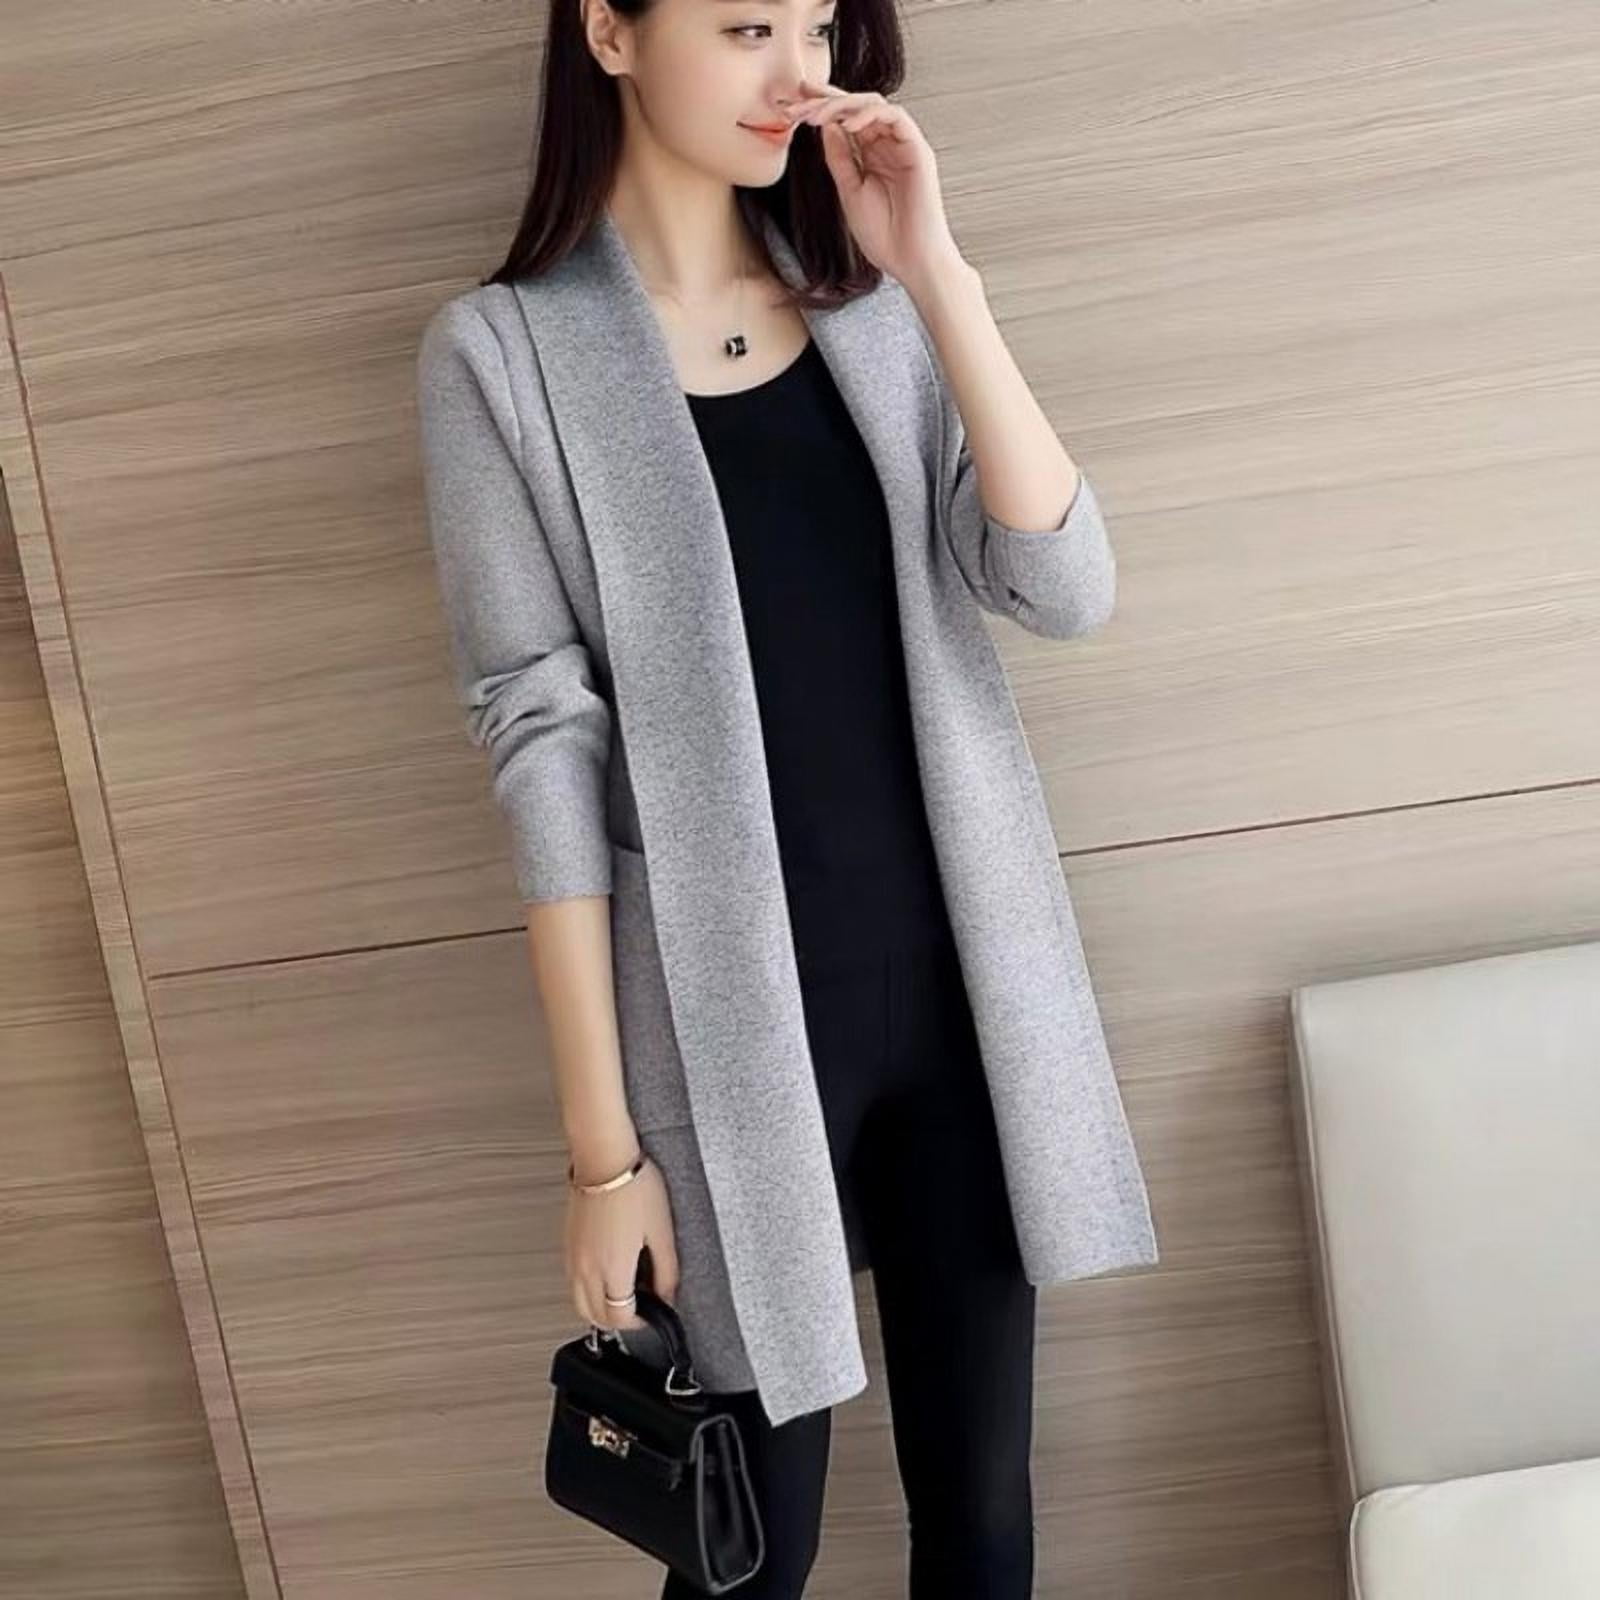 Autumn Loose Elegant Knitted Cardigan Long Solid Color Casual Sweater Coat Gray XXL - Walmart.com